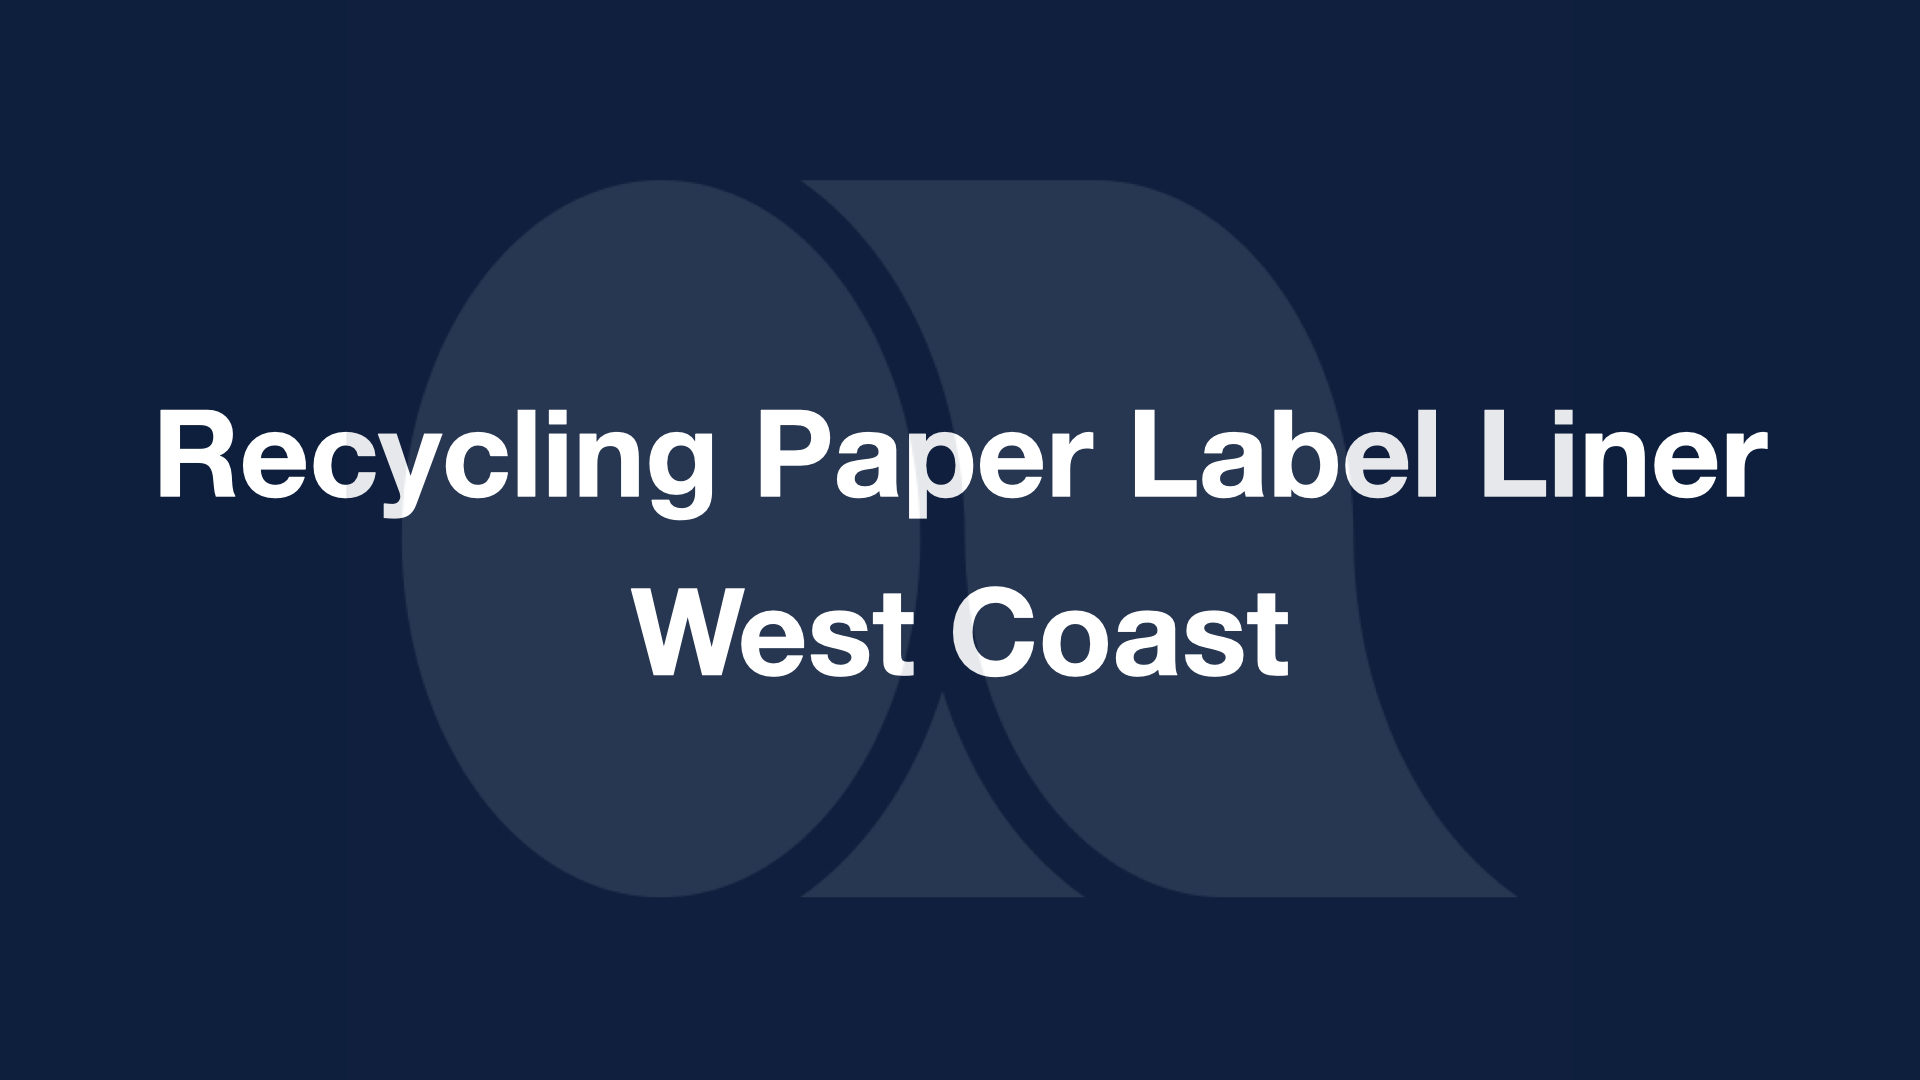 Recycling Paper Label Liner, West Coast